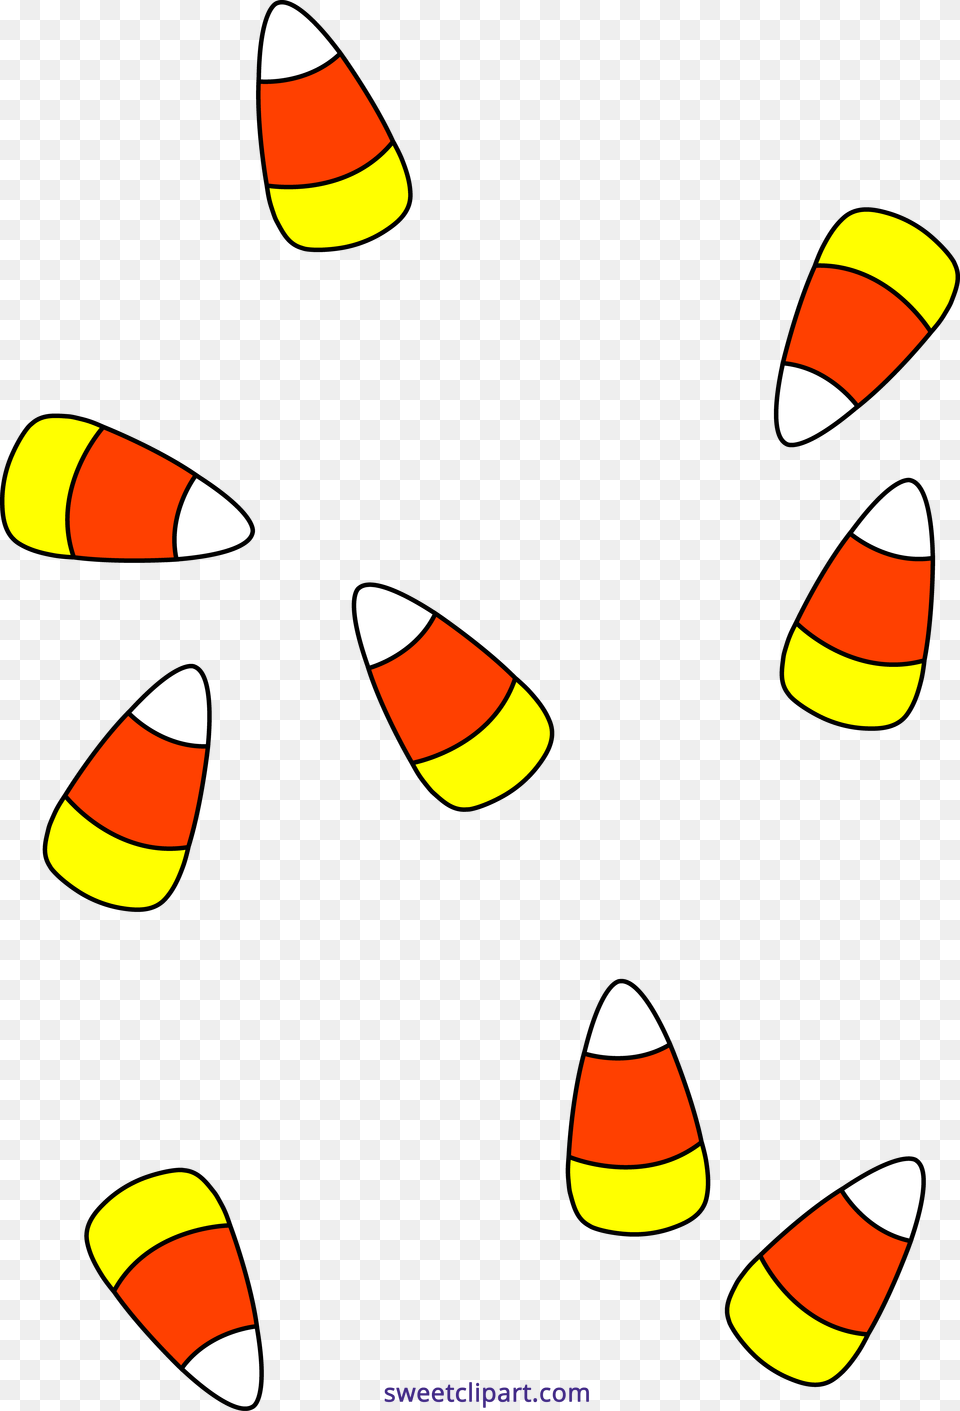 Holidays Halloween Candy Corn Set Clipart Clip Art Candy Corn, Food, Sweets, Grain, Produce Png Image